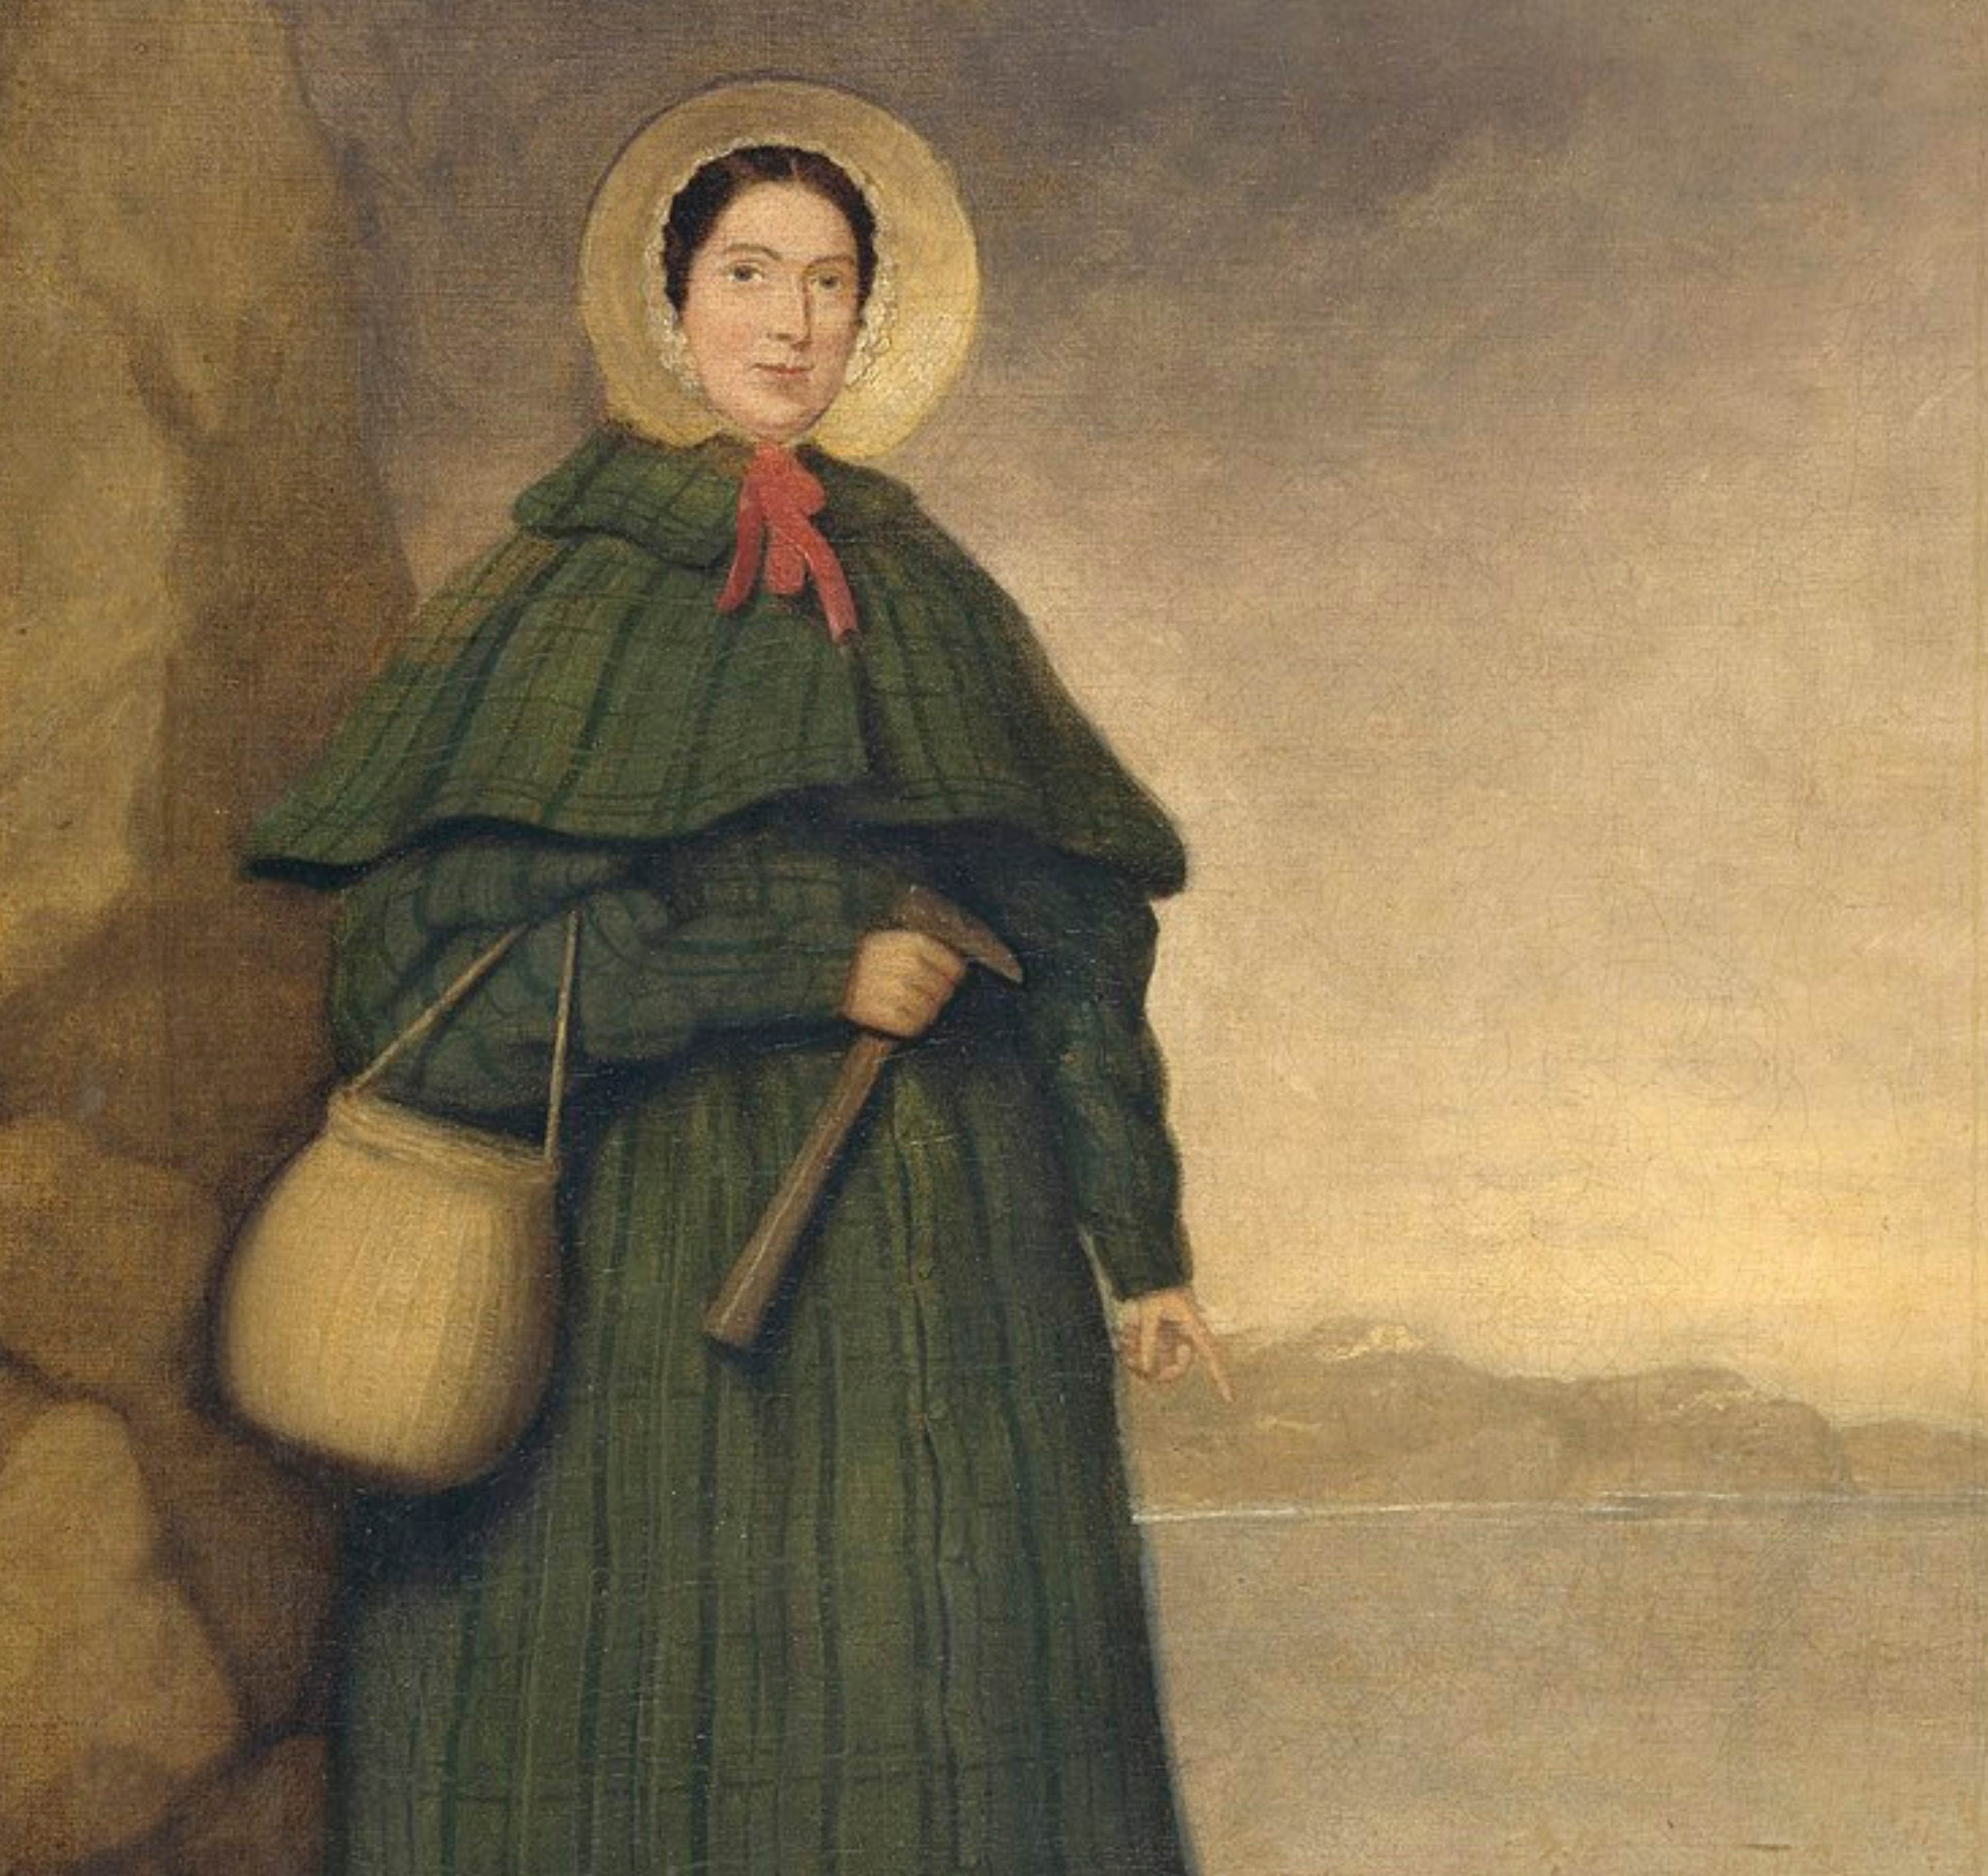 The story of Mary Anning